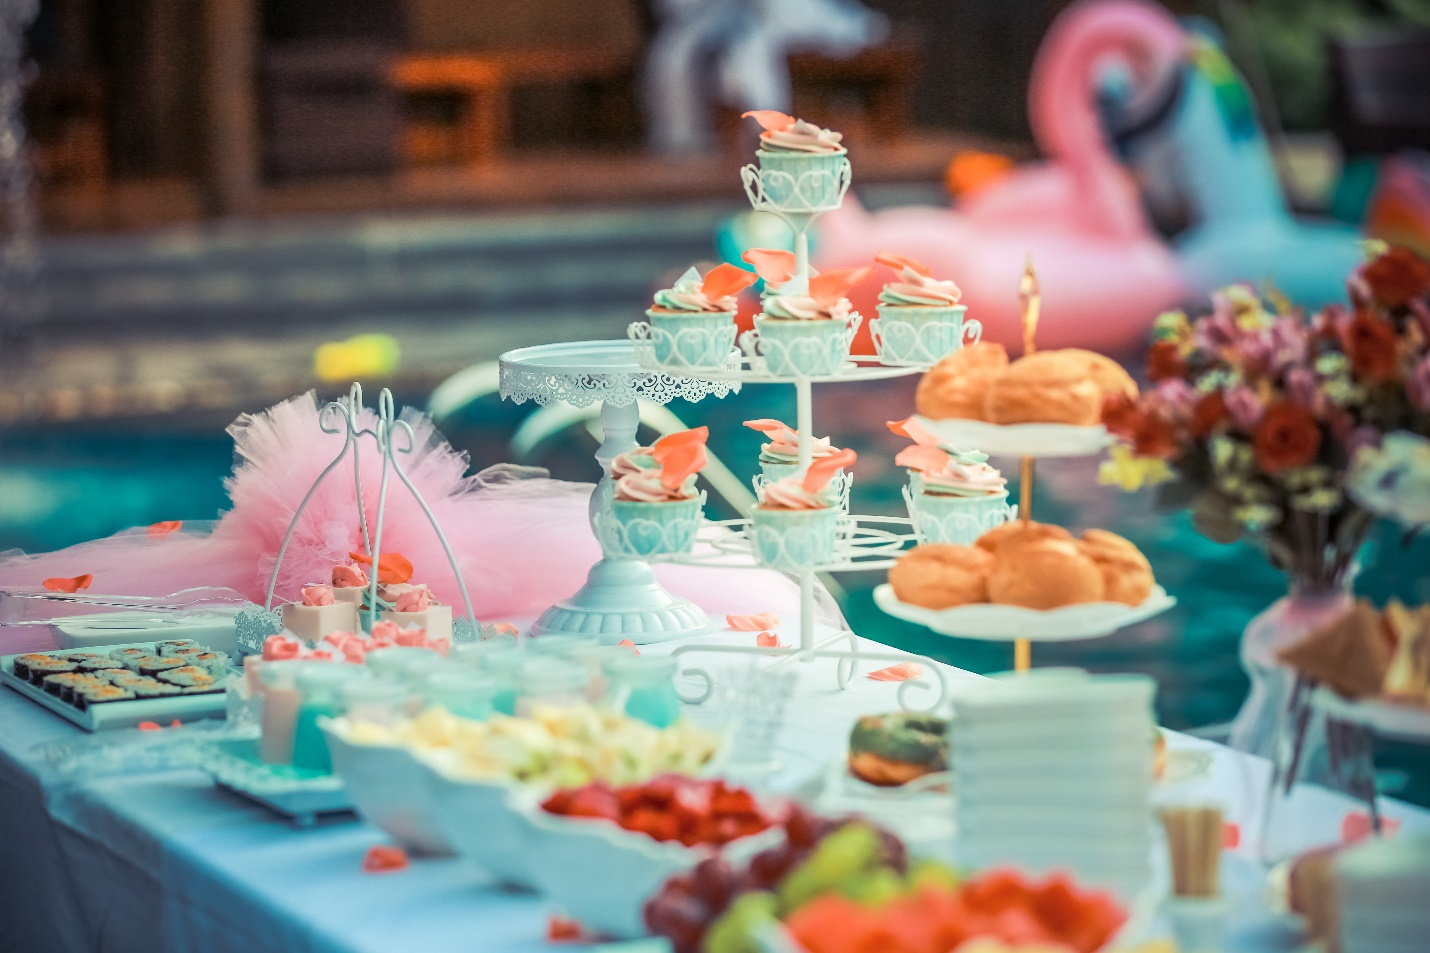 Cupcakes on display at a tea party